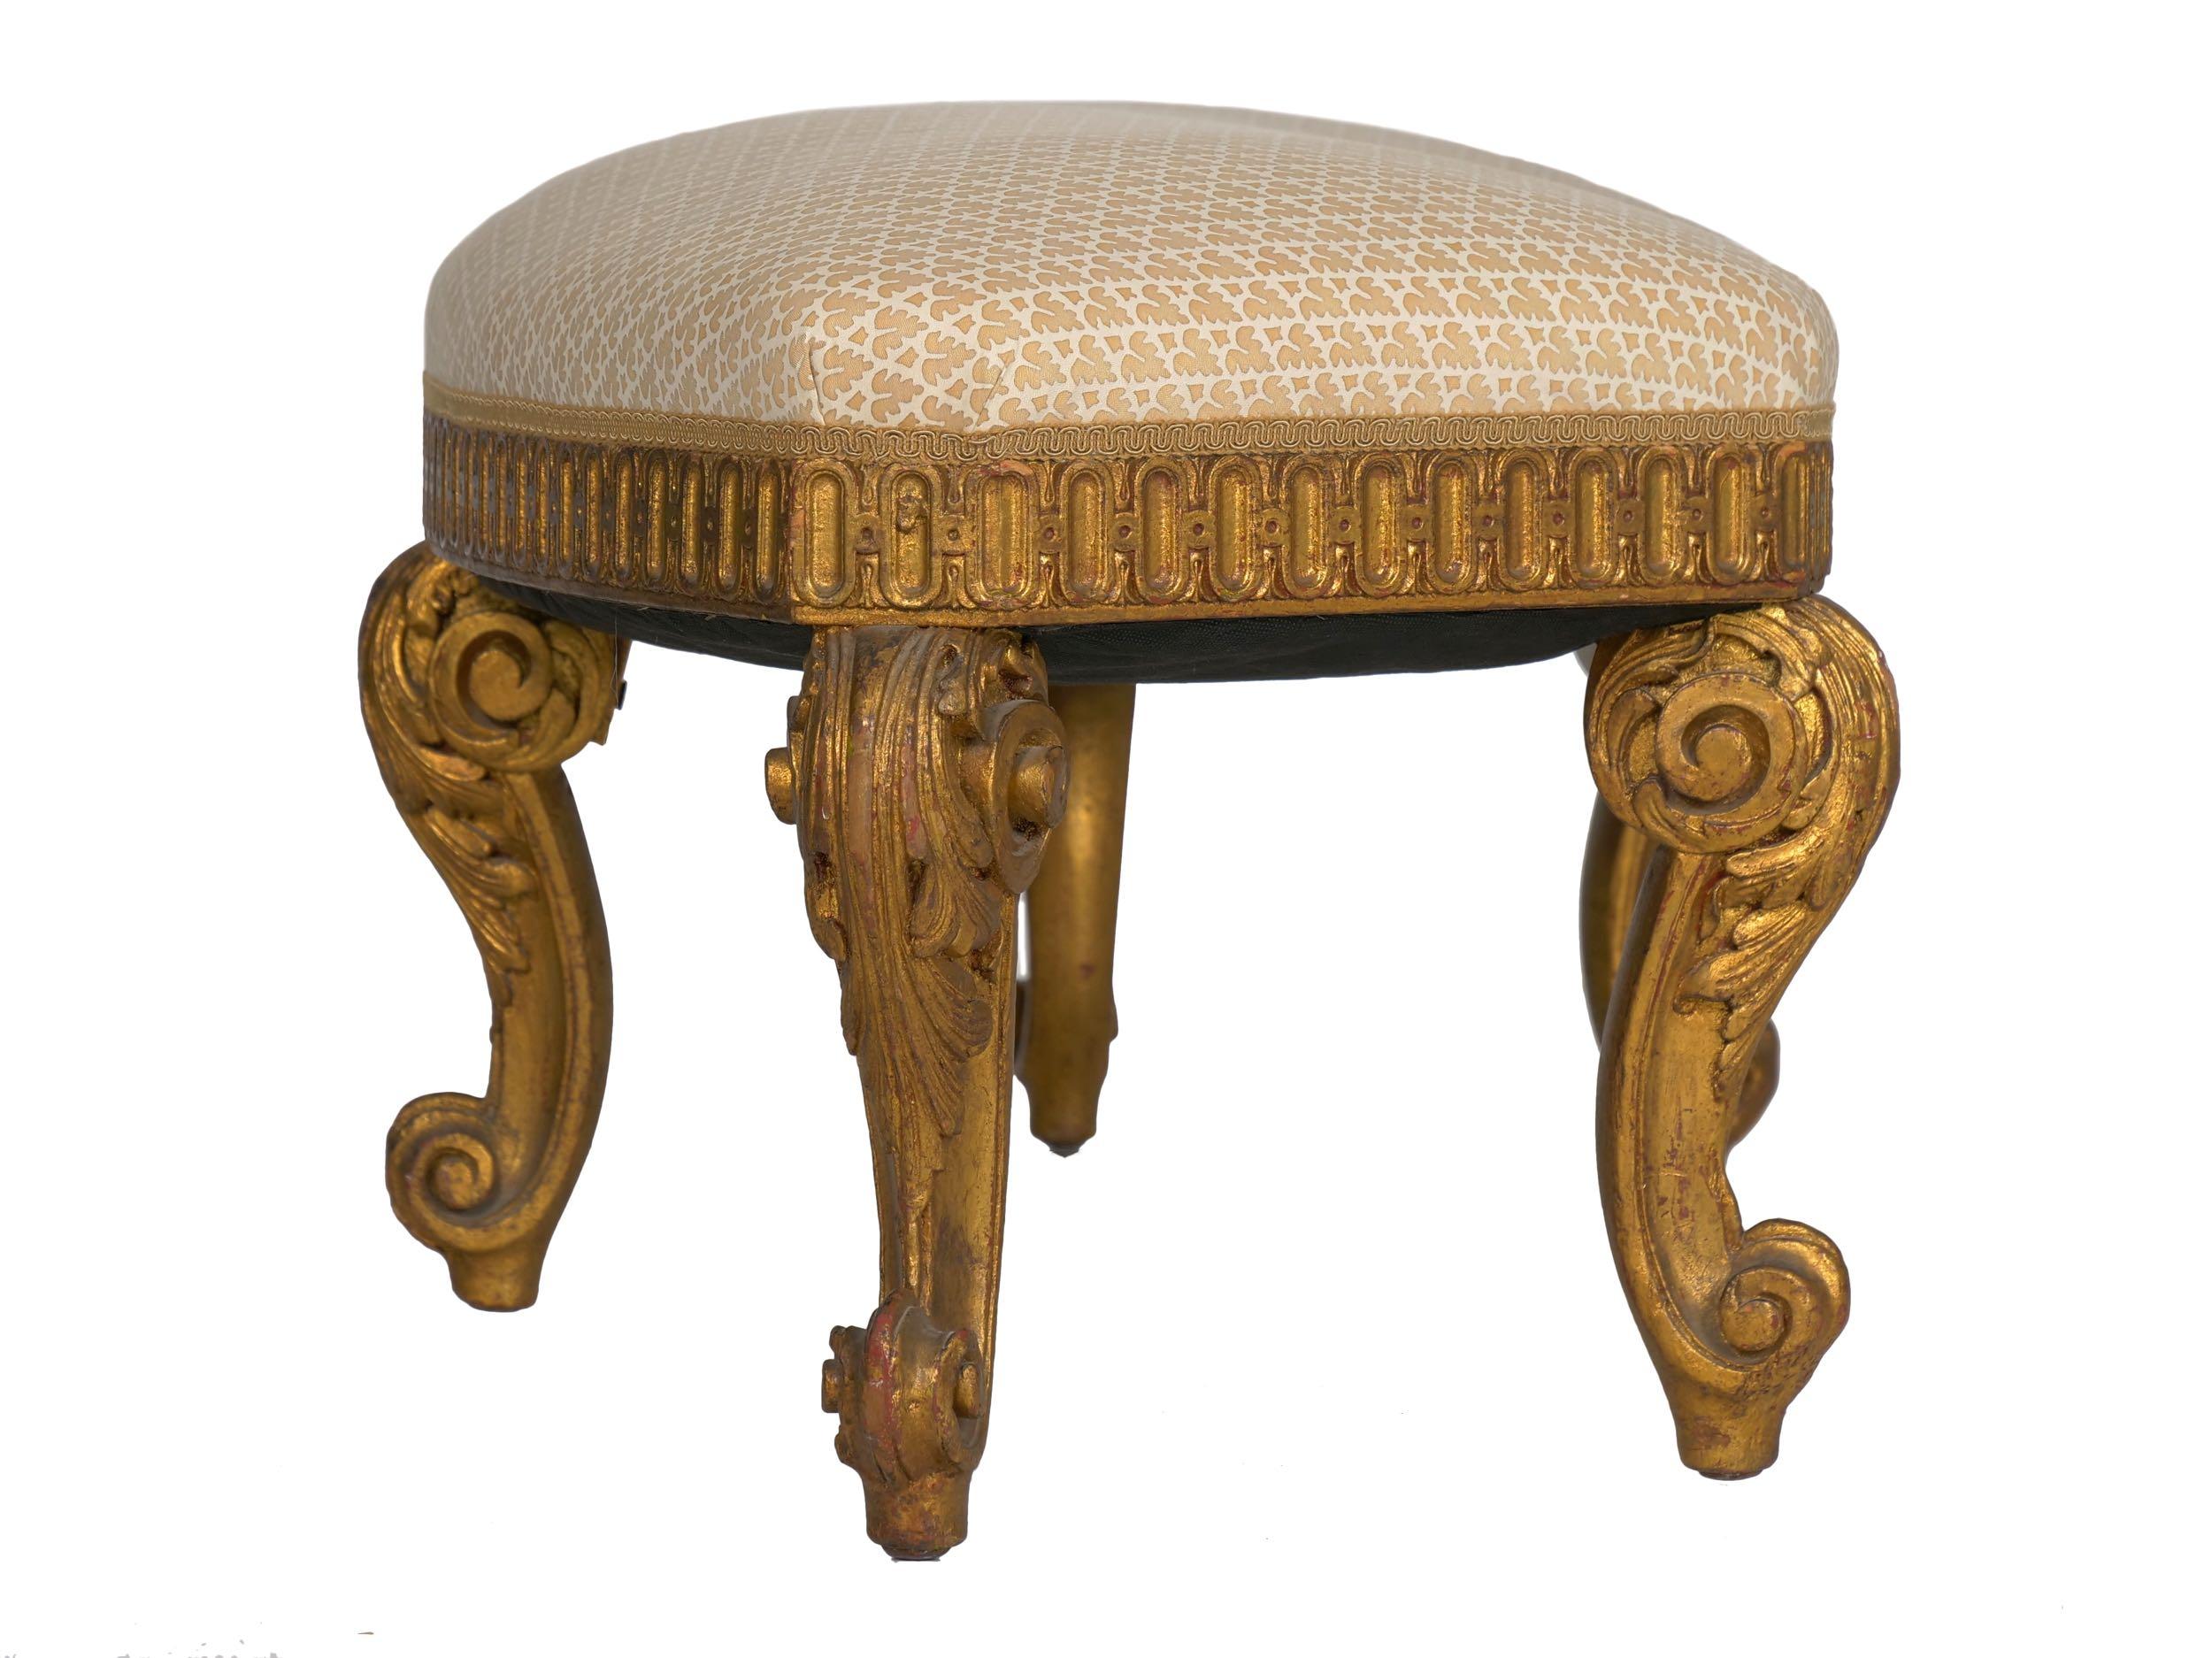 Fabric Vintage French Regency Style Carved Giltwood Foot Stool Bench, 20th Century